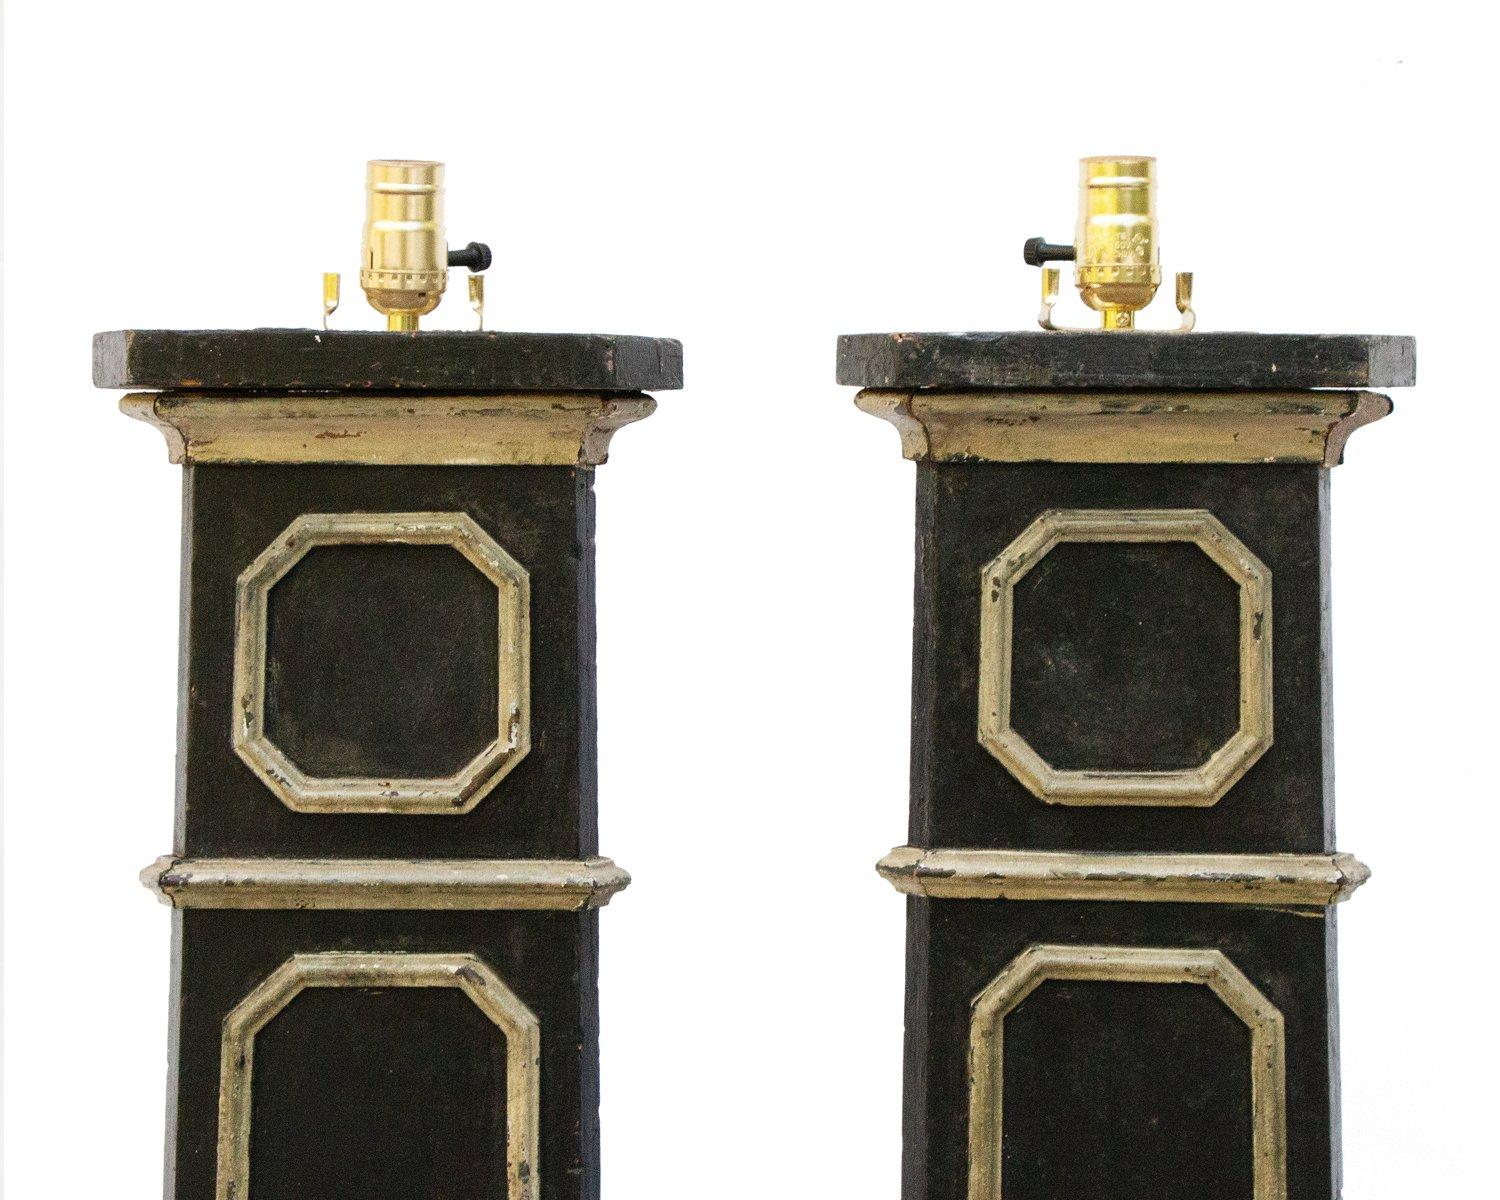 A pair of 18th century Italian wooden black floor lamps with hand-carved crescent moons decorating the body of the lamps. These originate from a church in Liguria, Italy. They were originally altar sticks that have been converted into lamps. They